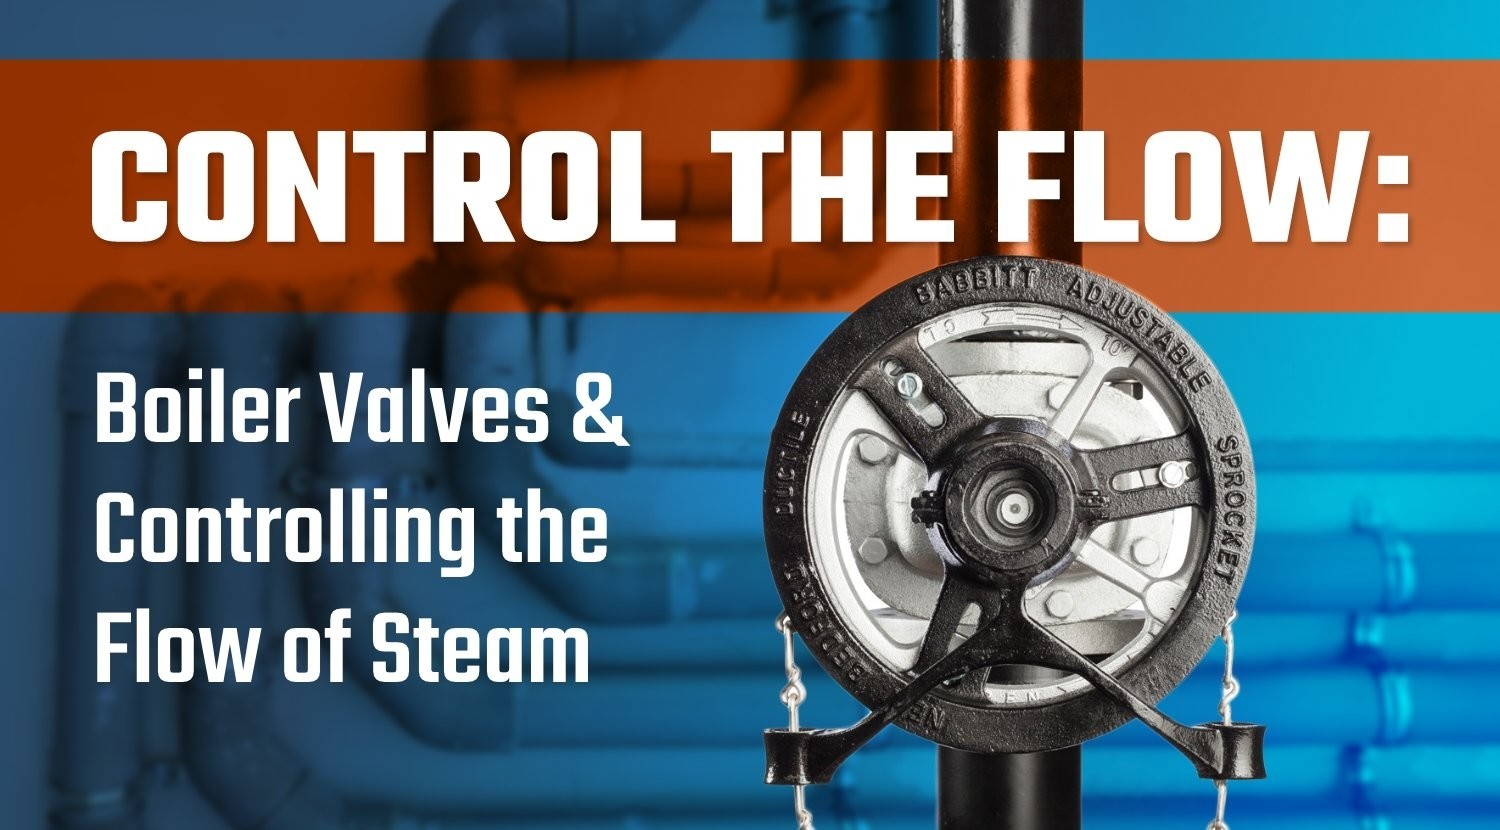 Control the Flow: Boiler Valves & Controlling the Flow of Steam